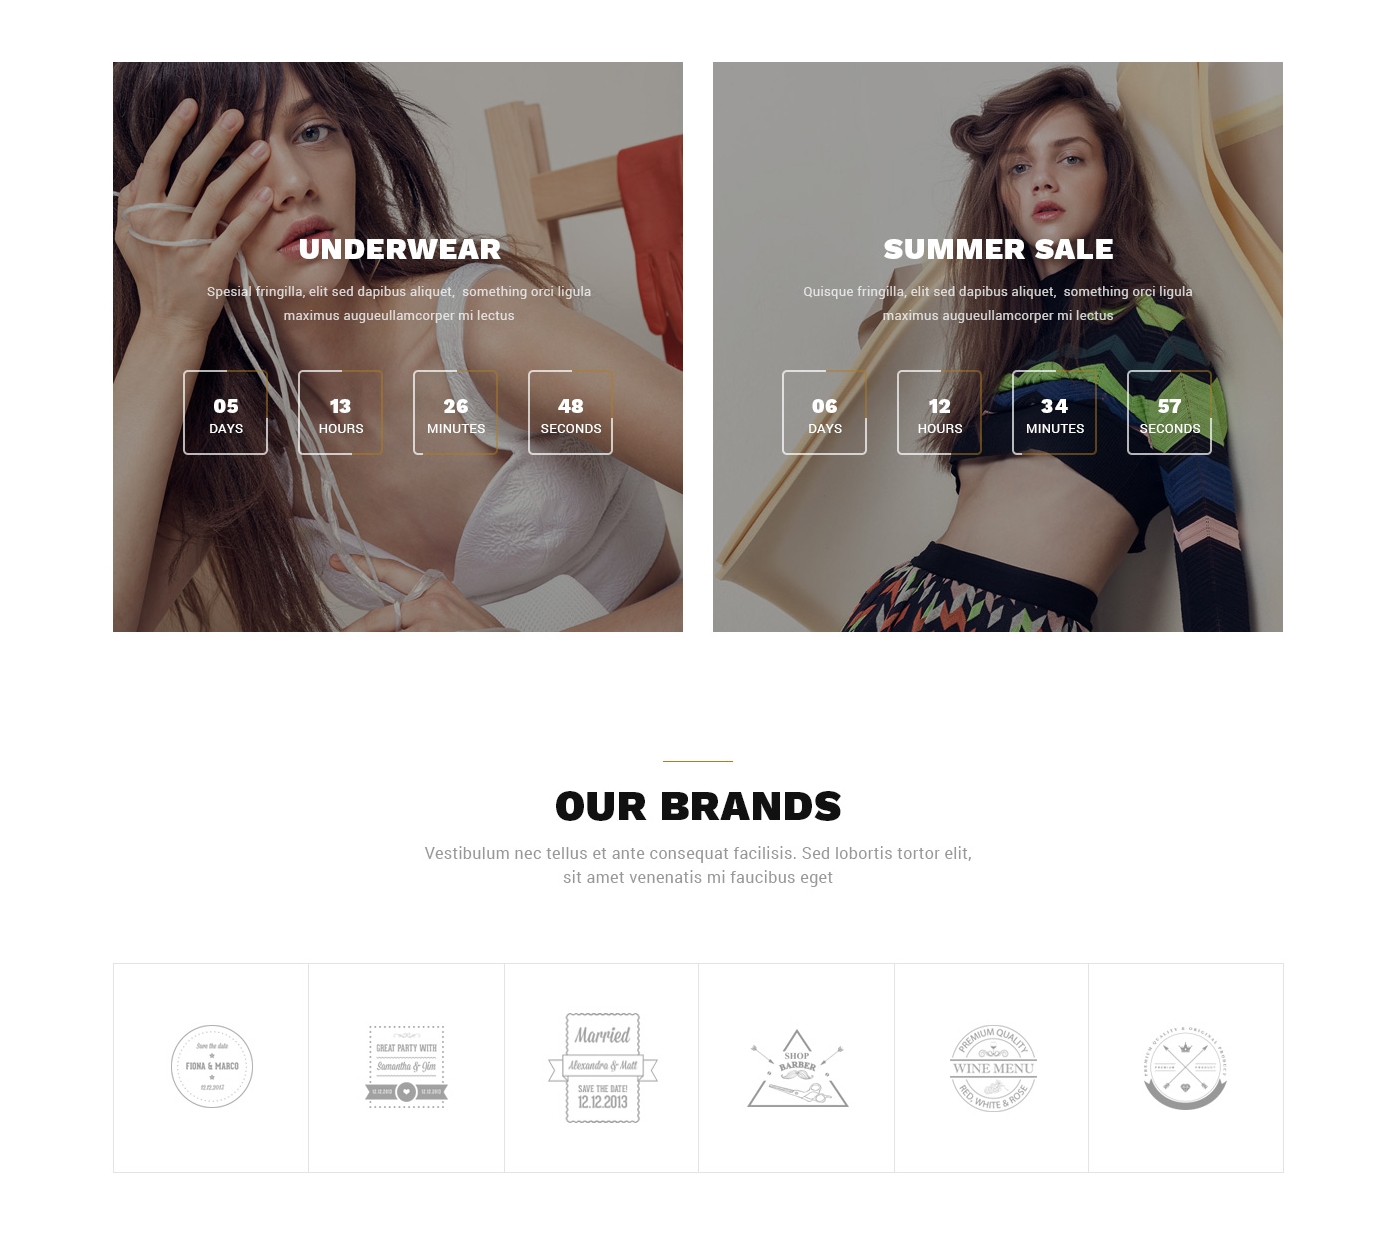 Mobile Bootstrap OnePage Theme